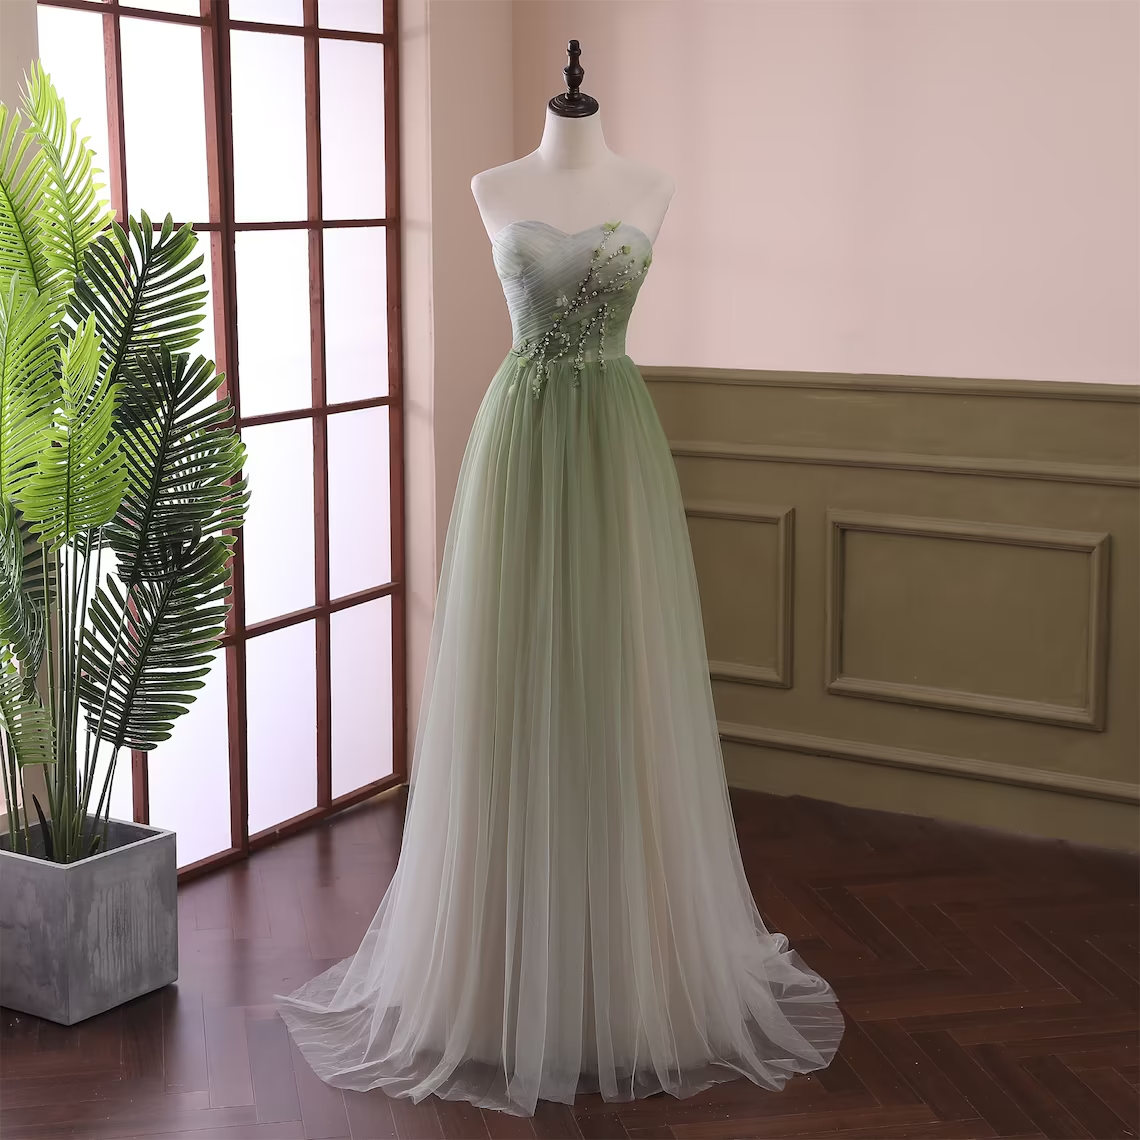 Charming Green Gradient Tulle Full Length Sweetheart Beaded Long Formal Dress, Hand Made Green Evening Party Dresses Sa35